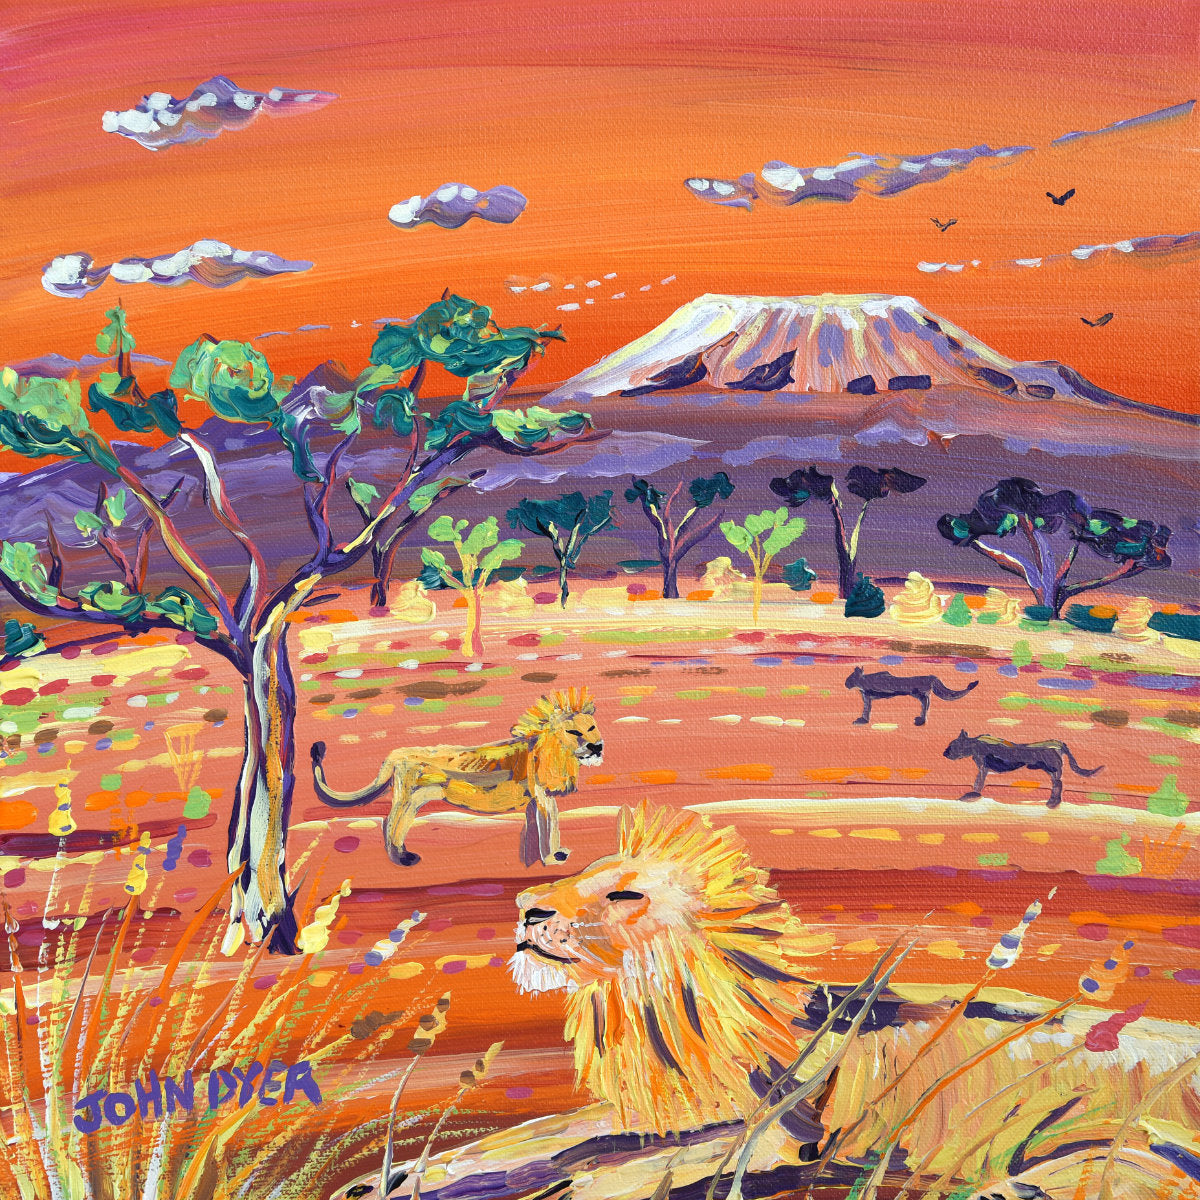 'Sunset Lions, Kenya', 12x12 inches acrylic on canvas. Paintings of Africa by British Artist John Dyer.